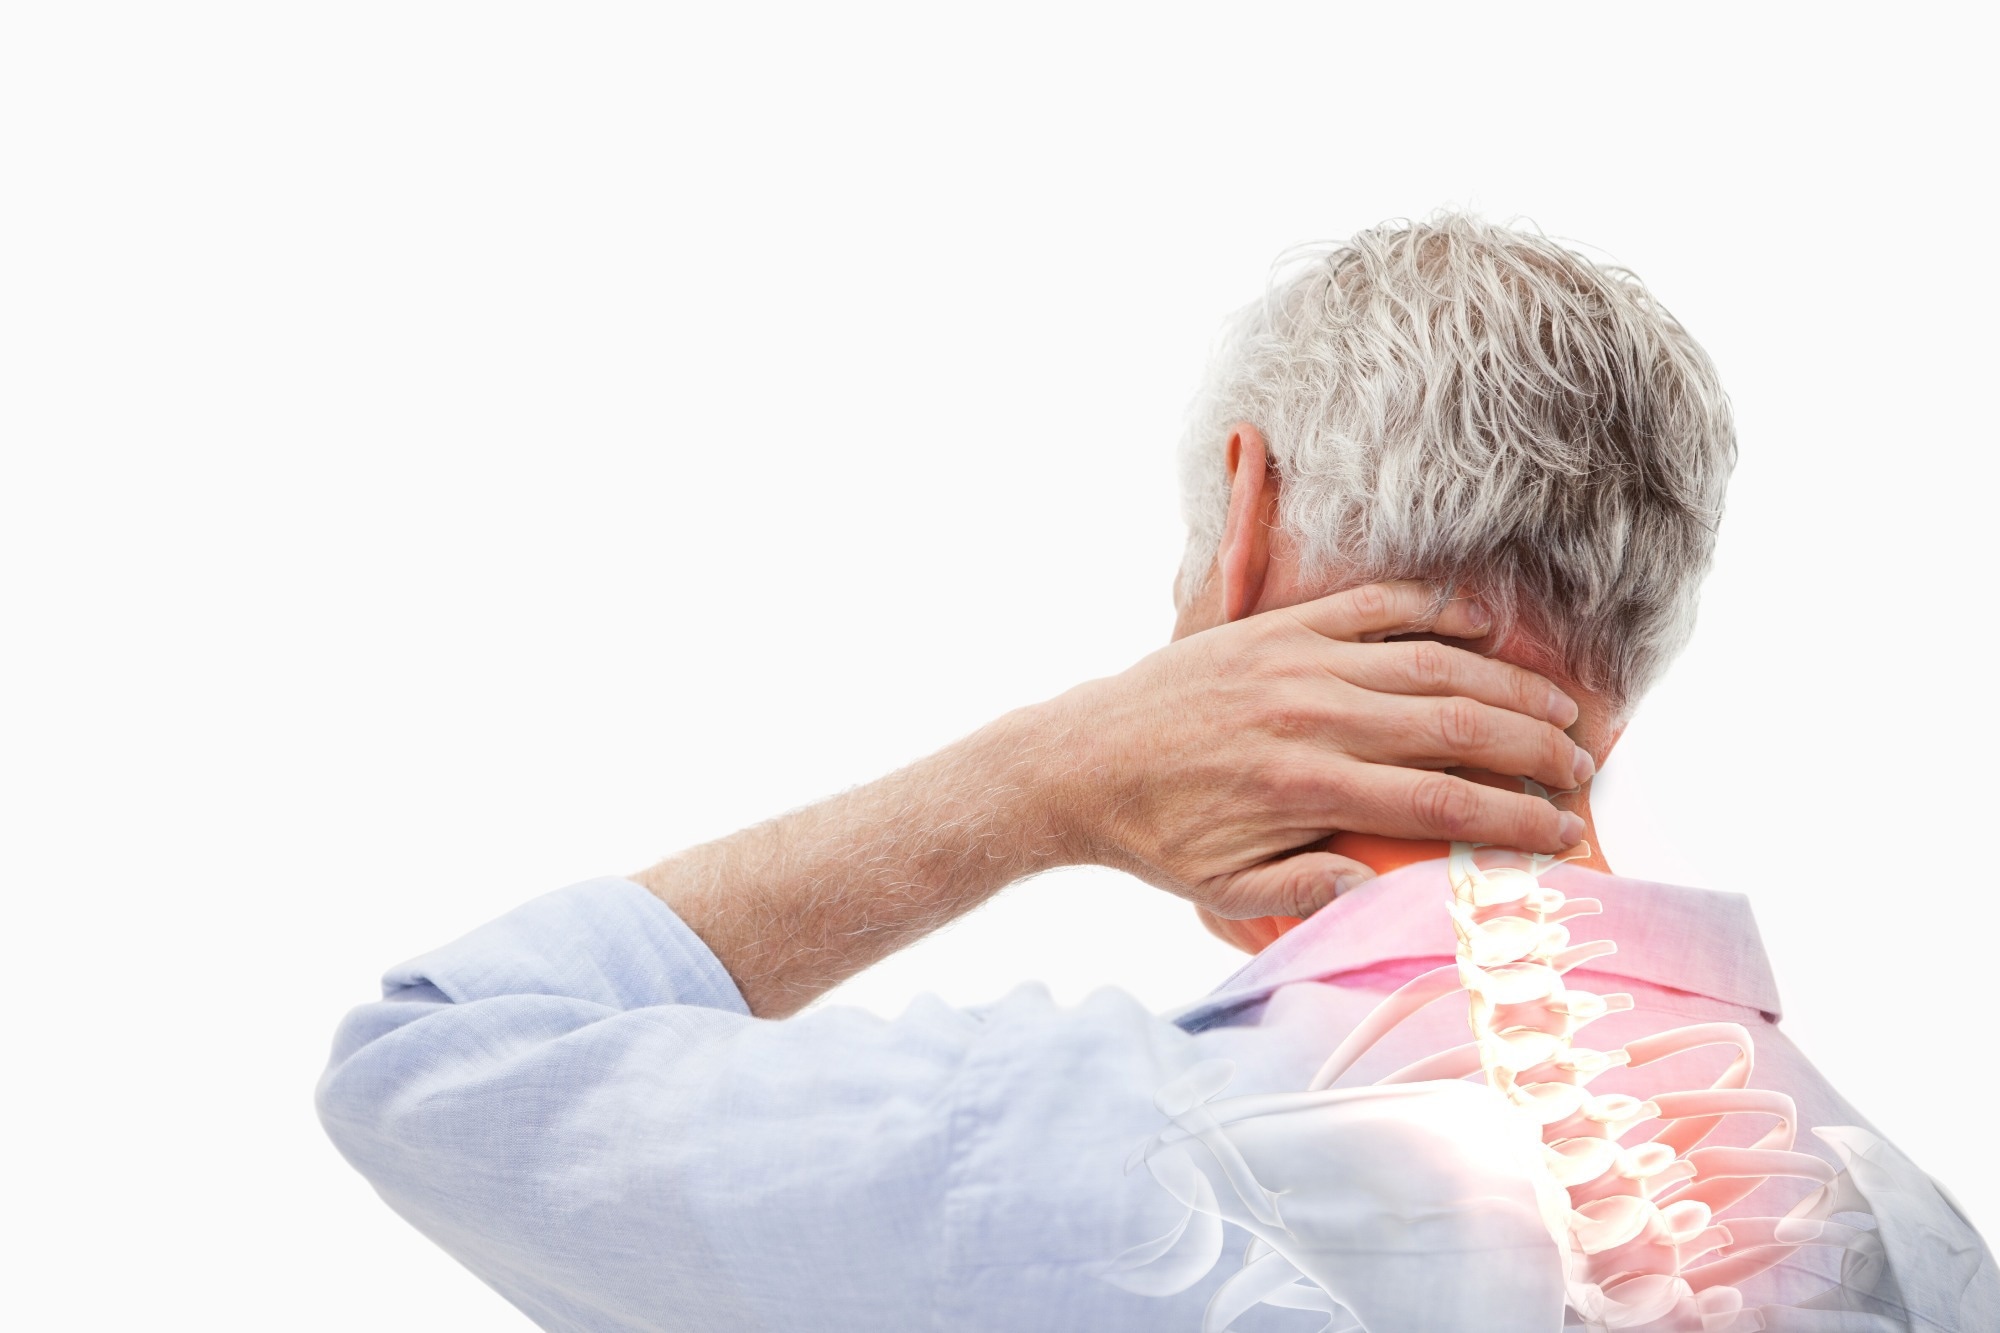 Study: Estimated Rates of Incident and Persistent Chronic Pain Among US Adults, 2019-2020. Image Credit: ESBProfessional/Shutterstock.com